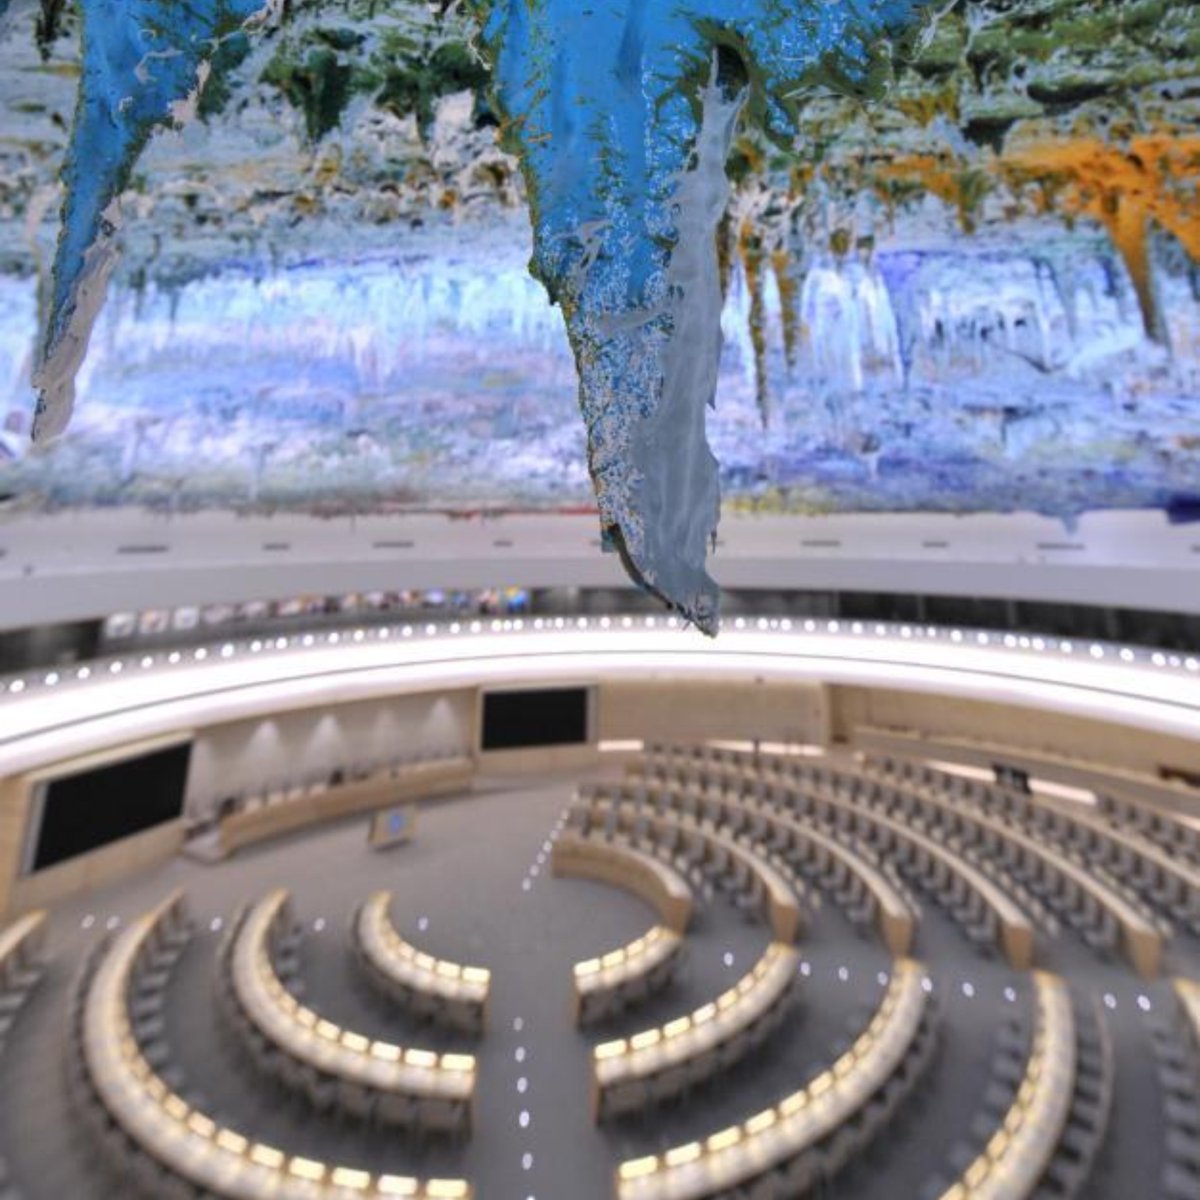 The 53rd session of the @UN🇺🇳 Human Rights Council is now over.

The Council will reconvene on Monday 11 September 2023 at @UNGeneva to begin its 54th session ohchr.org/en/hr-bodies/h…

 #HRC53 ➡️ #HRC54